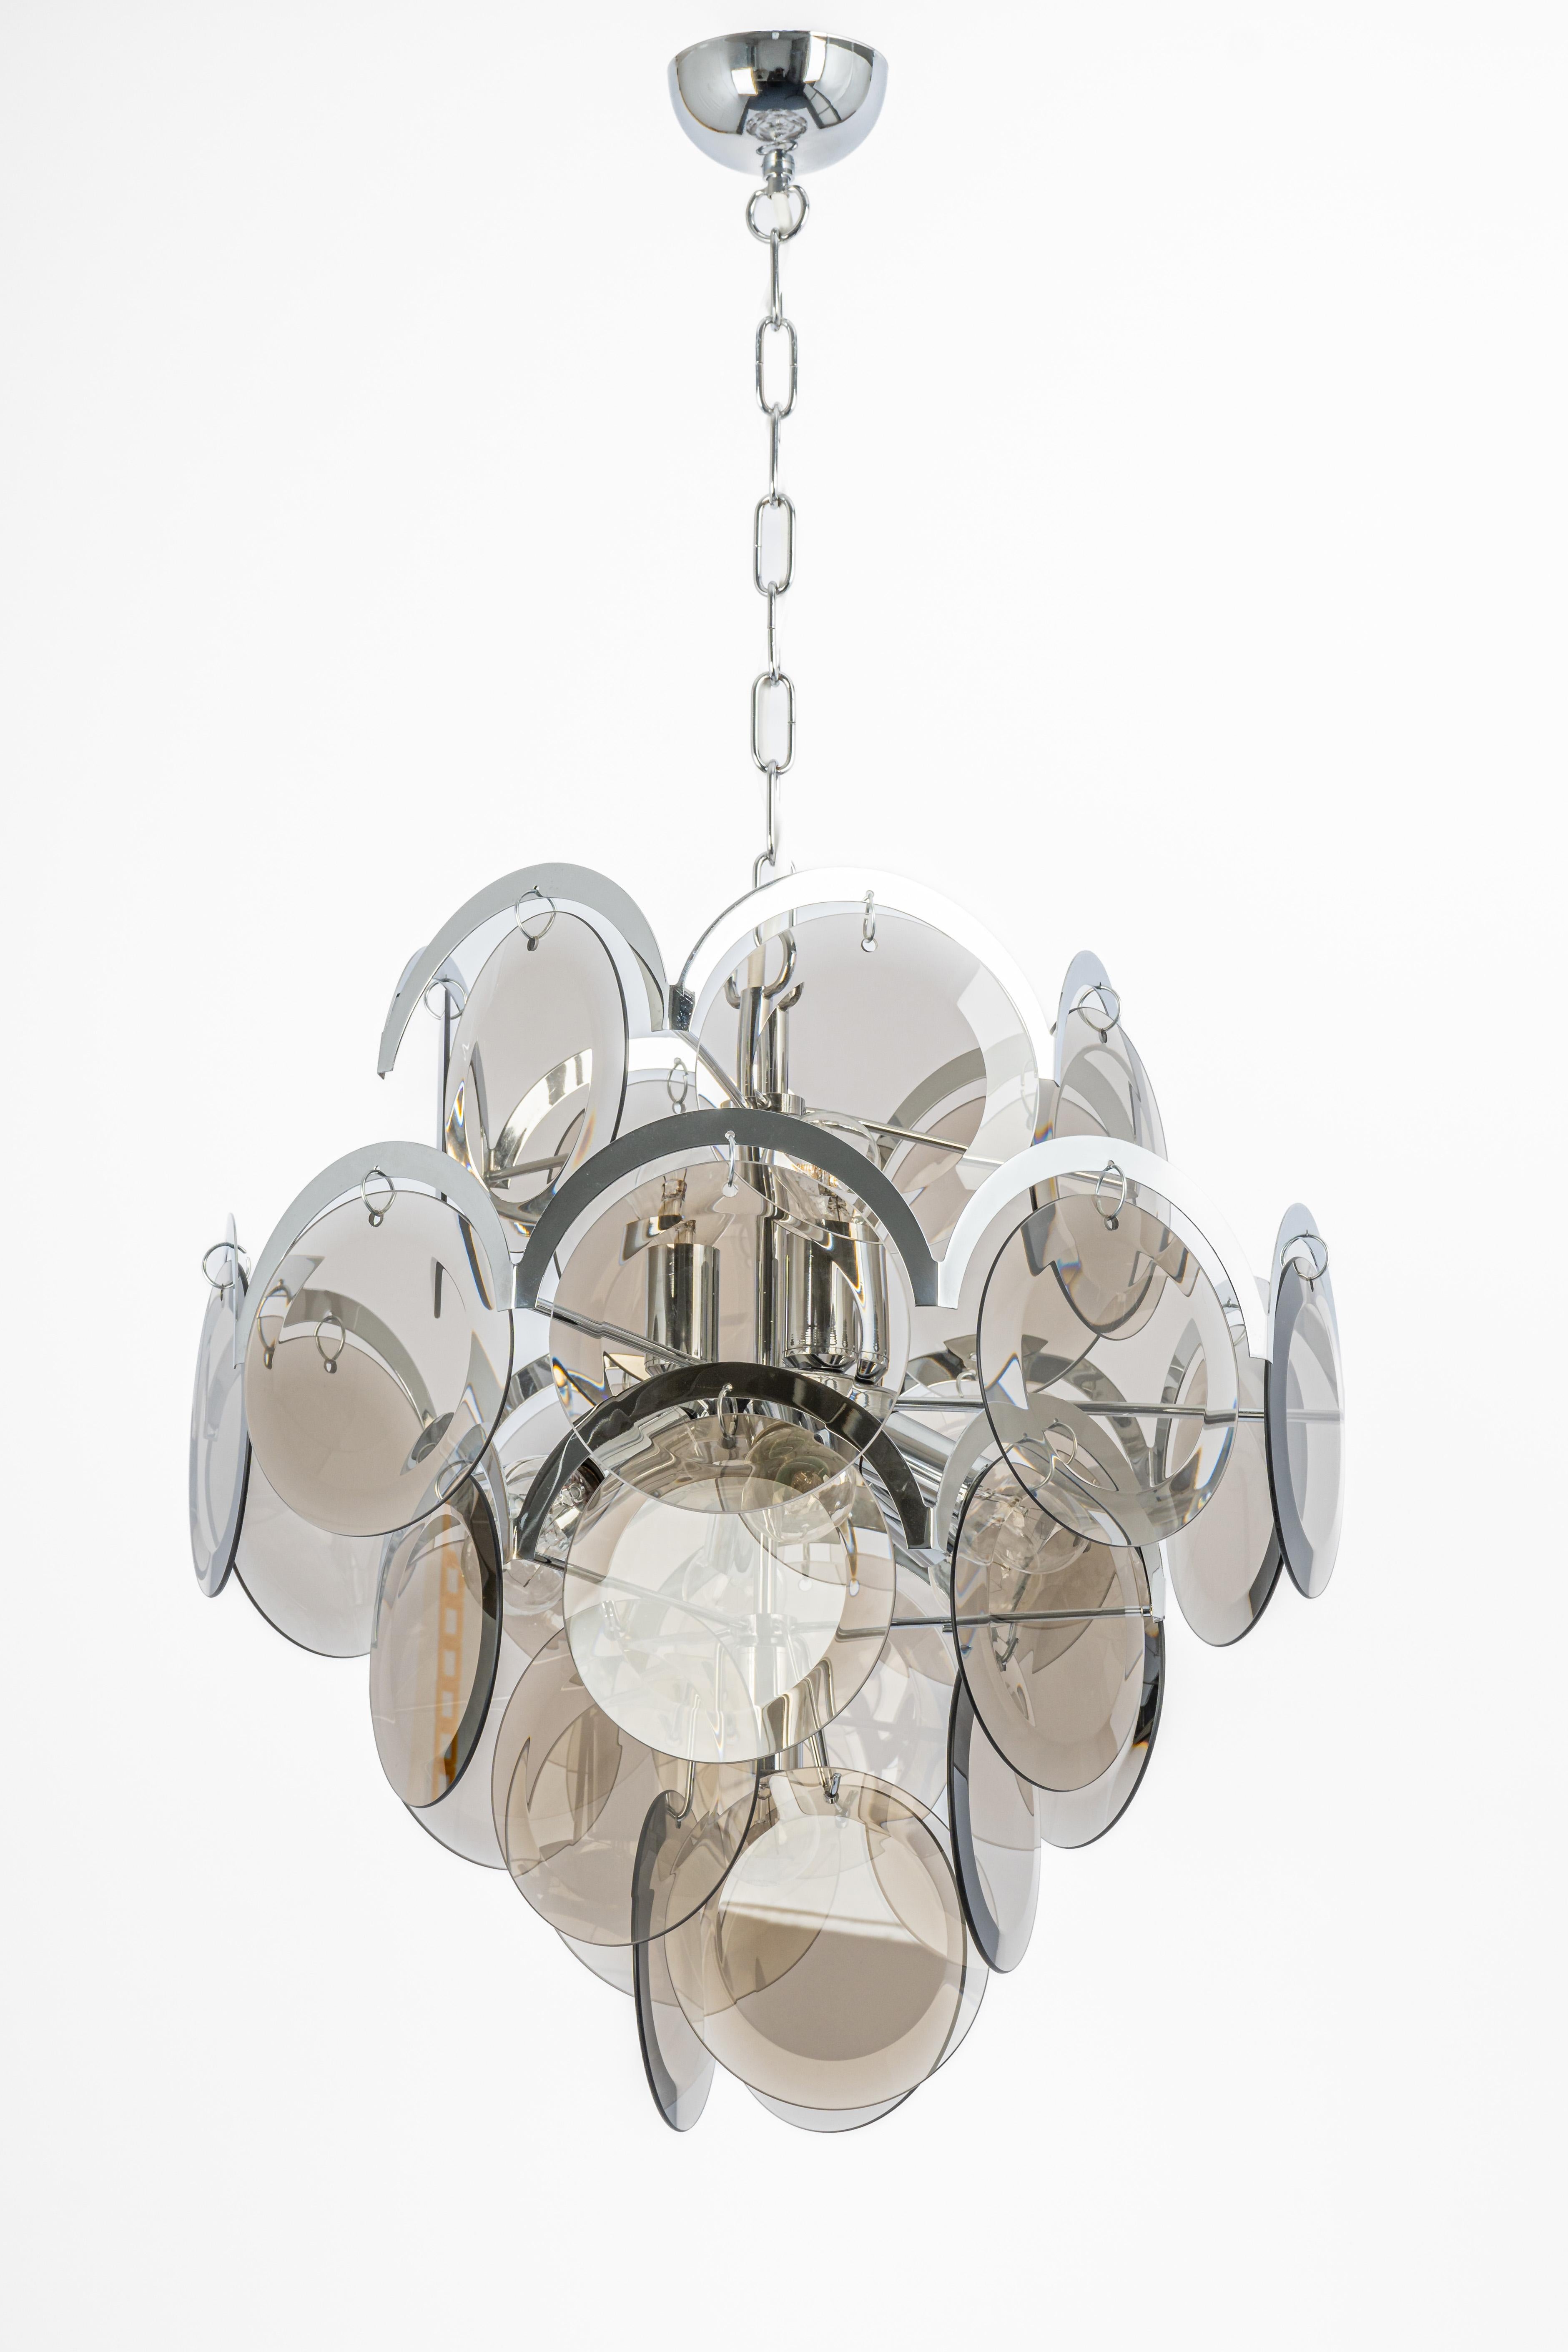 Vistosi Smoked Glass Disc Chrome Chandelier, Italy, 1970s For Sale 3